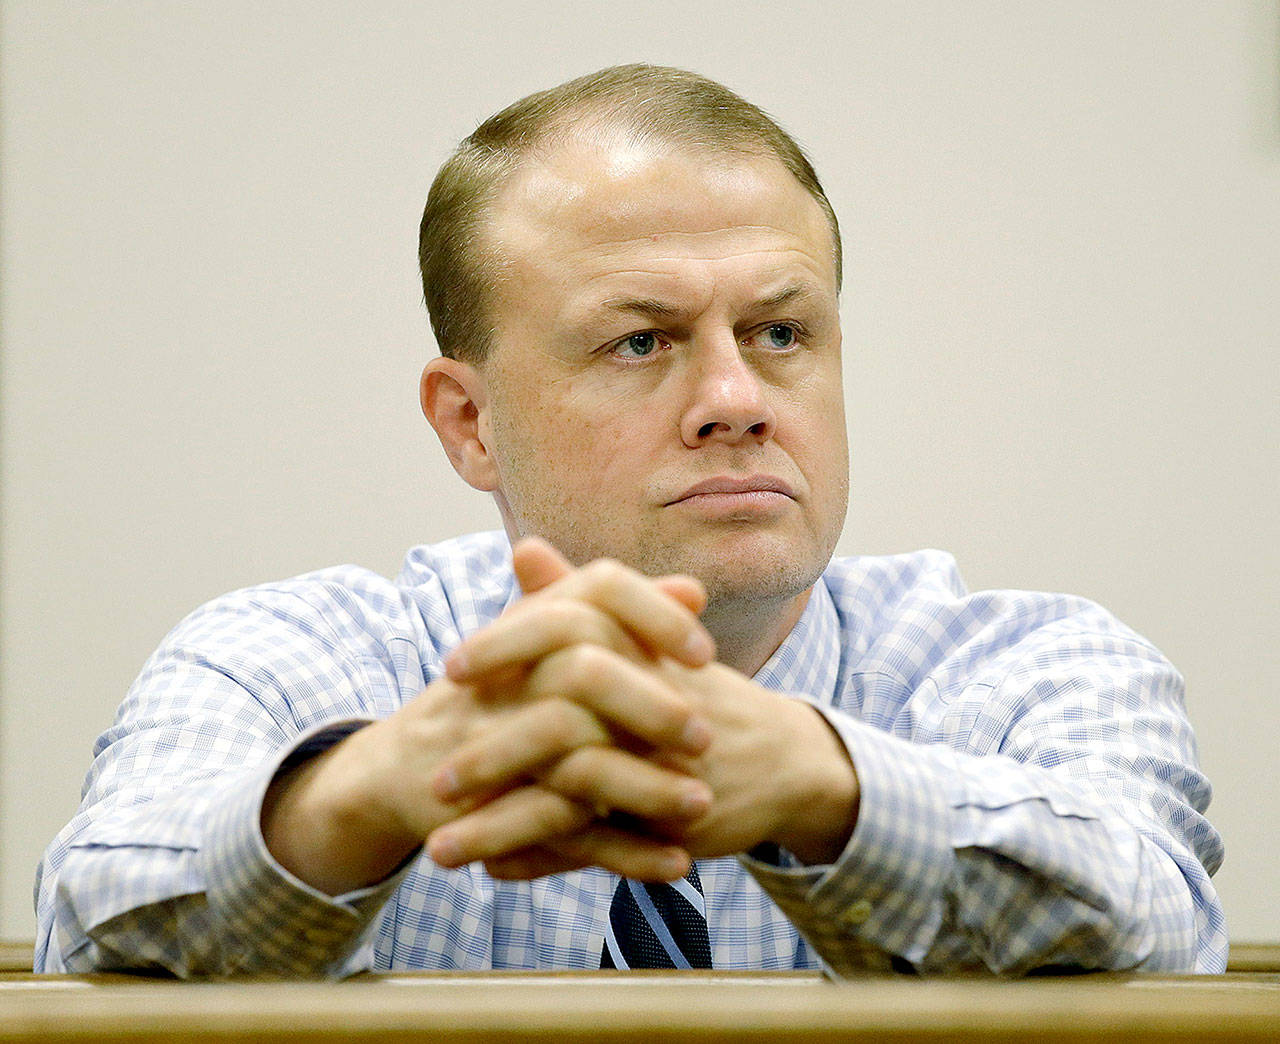 Tim Eyman during a court hearing about the legality of an anti-tax measure, in King County Superior Court in Seattle on Jan. 19, 2016. (AP Photo/Elaine Thompson)